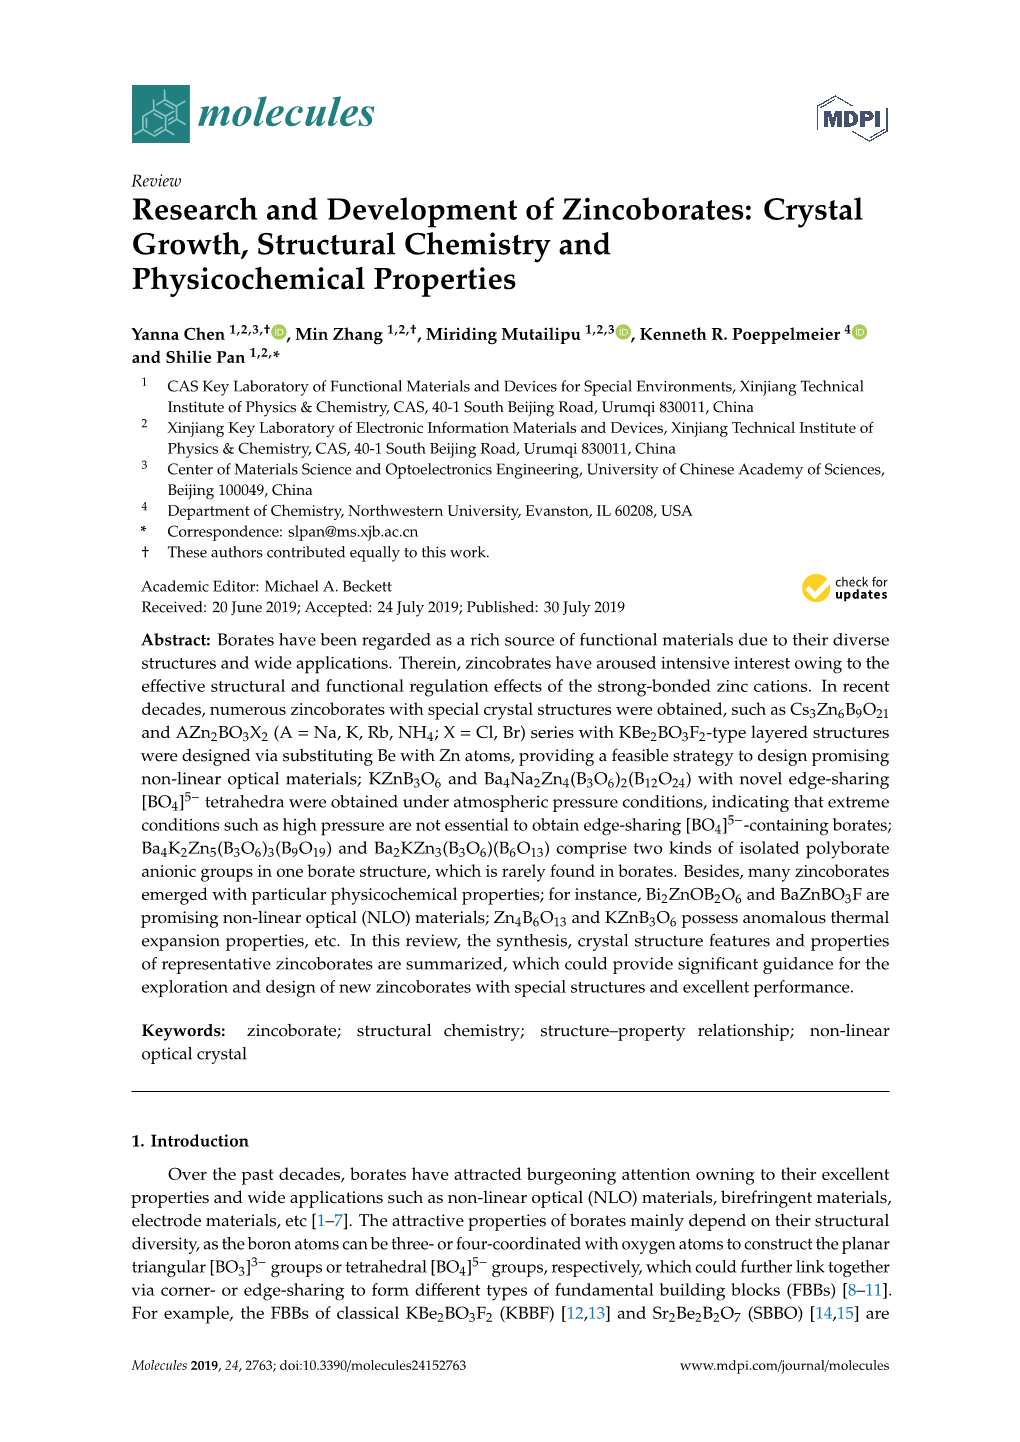 Crystal Growth, Structural Chemistry and Physicochemical Properties